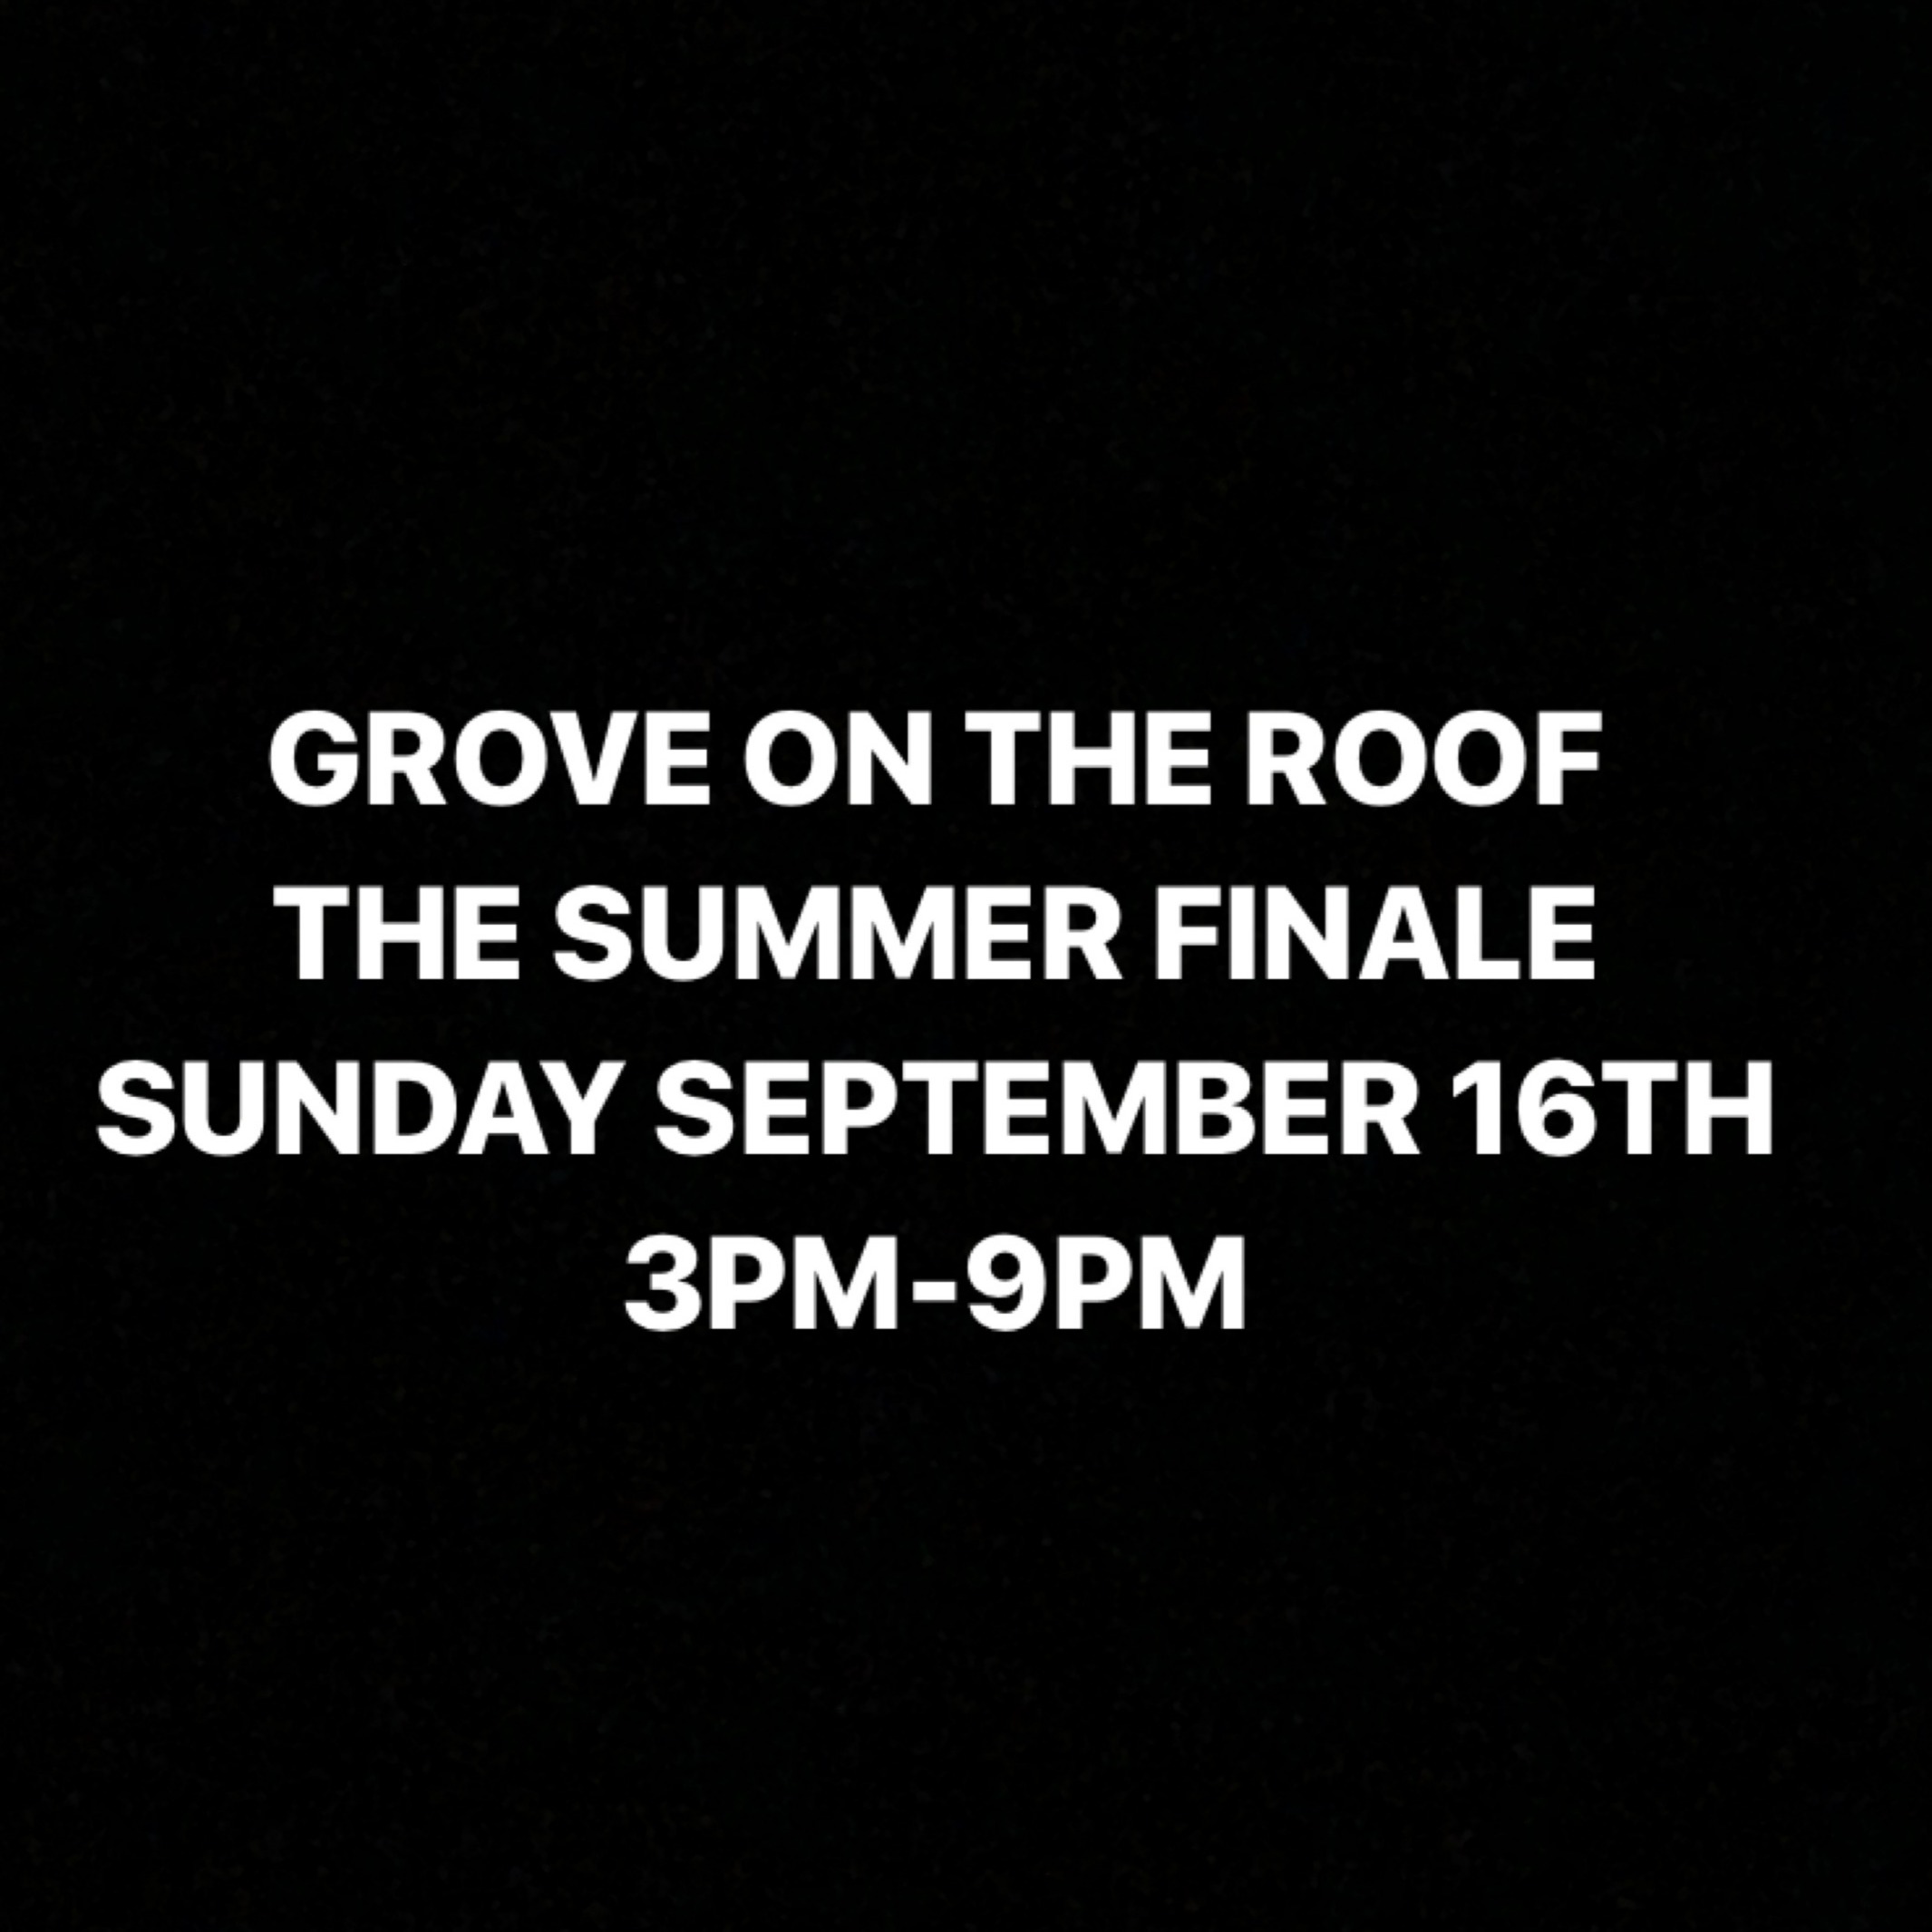 GROVE ON THE ROOF SUMMER FINALE